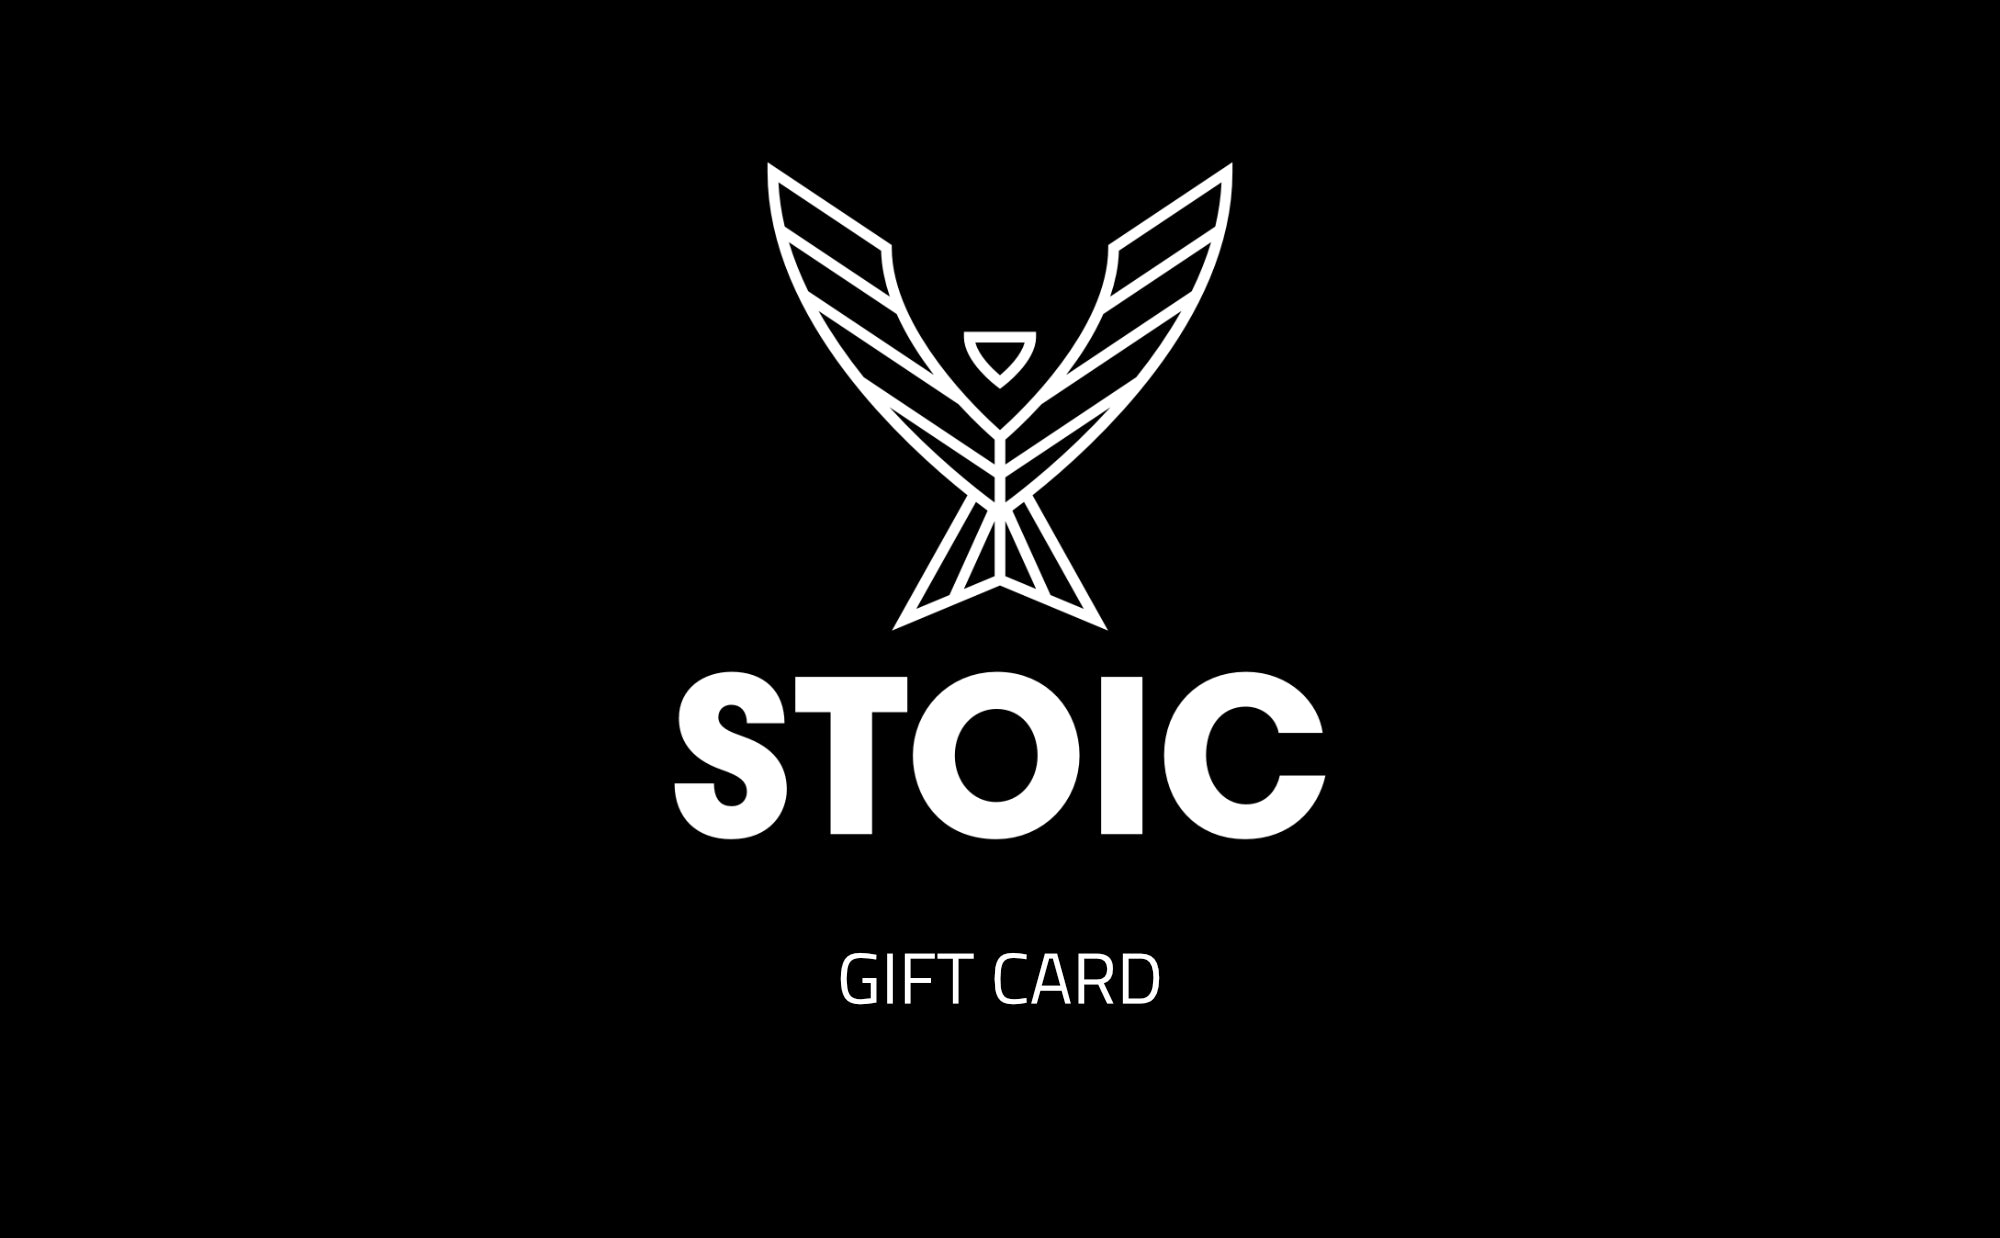 Stoic Gift Card